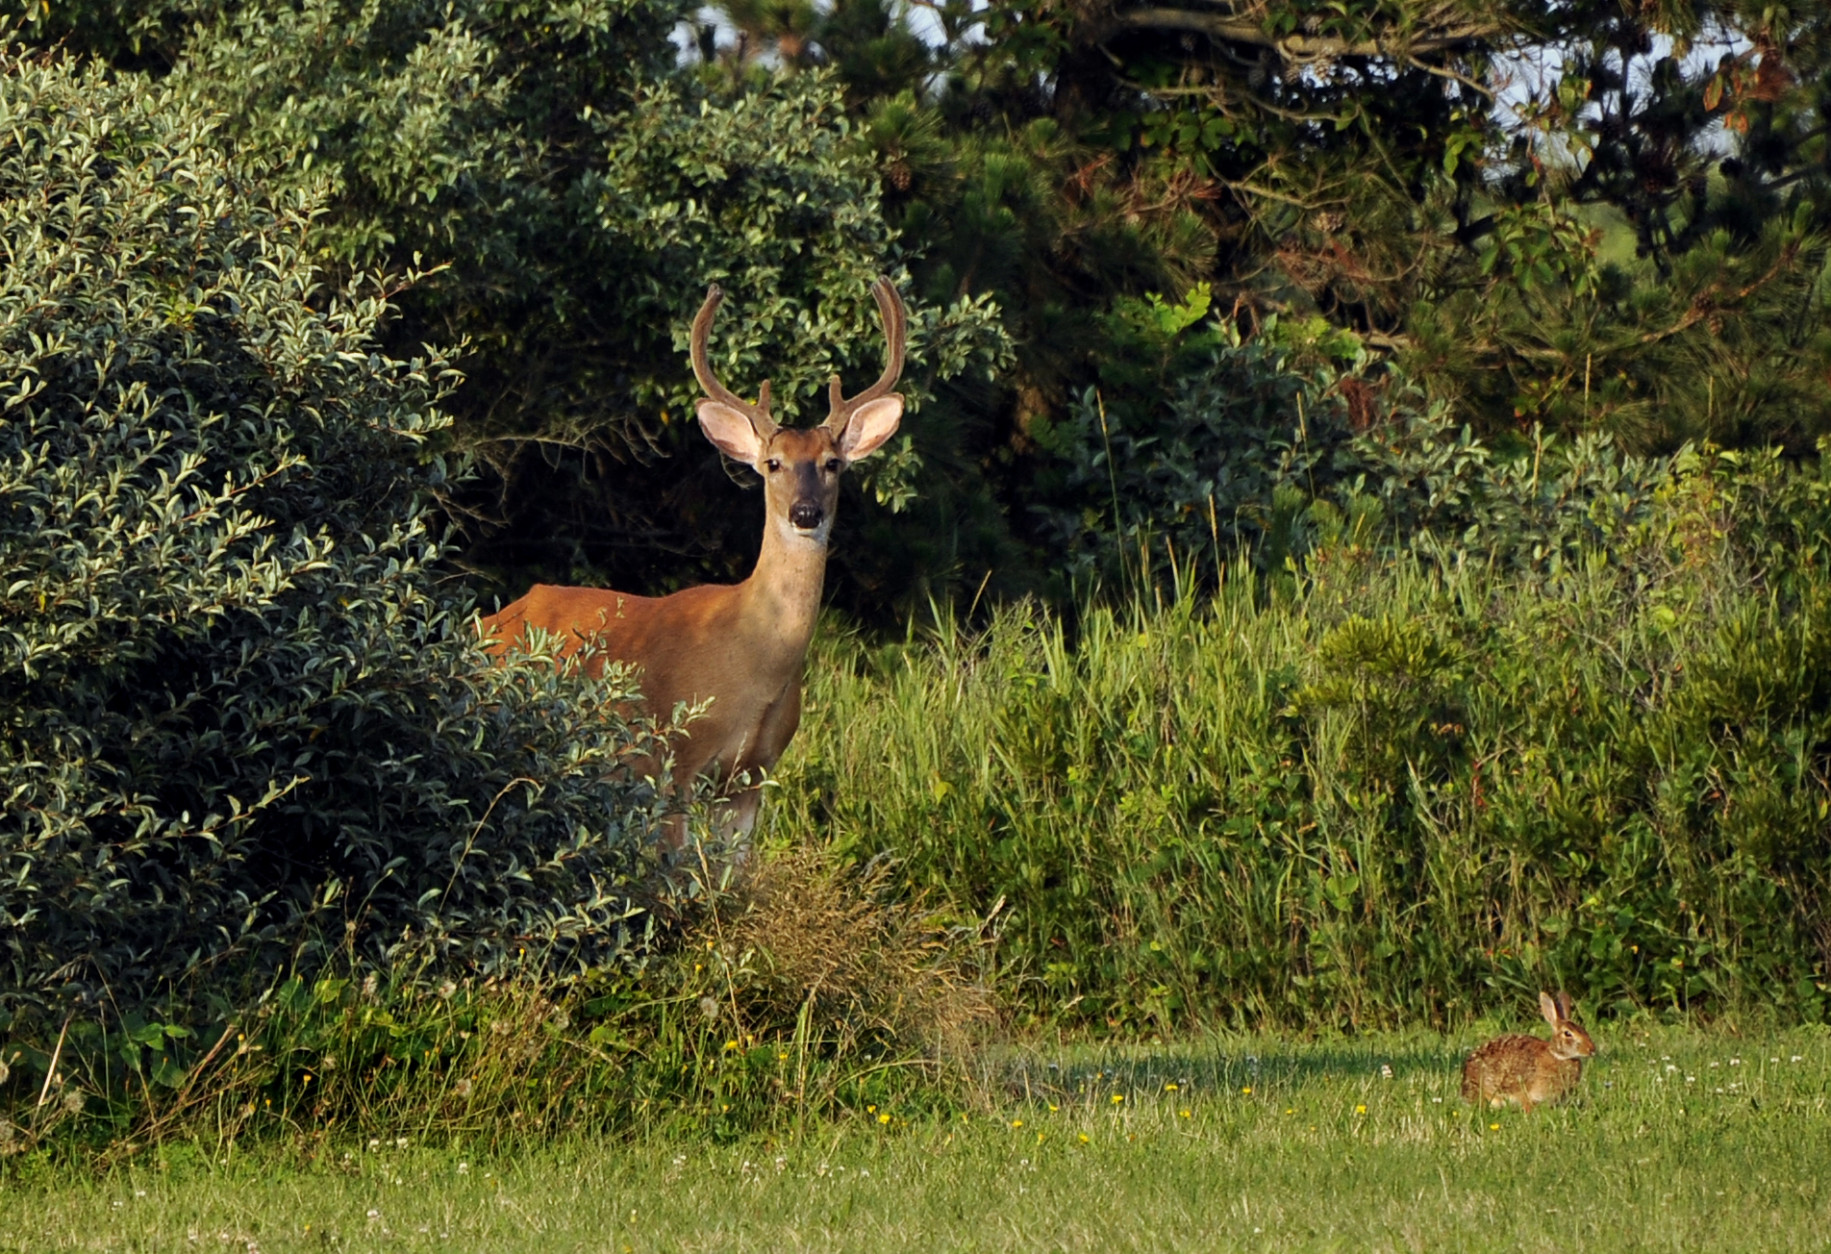 A buck and a rabbit peak out from the bushes that line the roadway at Robert Moses State Park on Tuesday, July 22, 2014, in Babylon, N.Y. Deer are a common sight at the park. (AP Photo/Kathy Kmonicek)